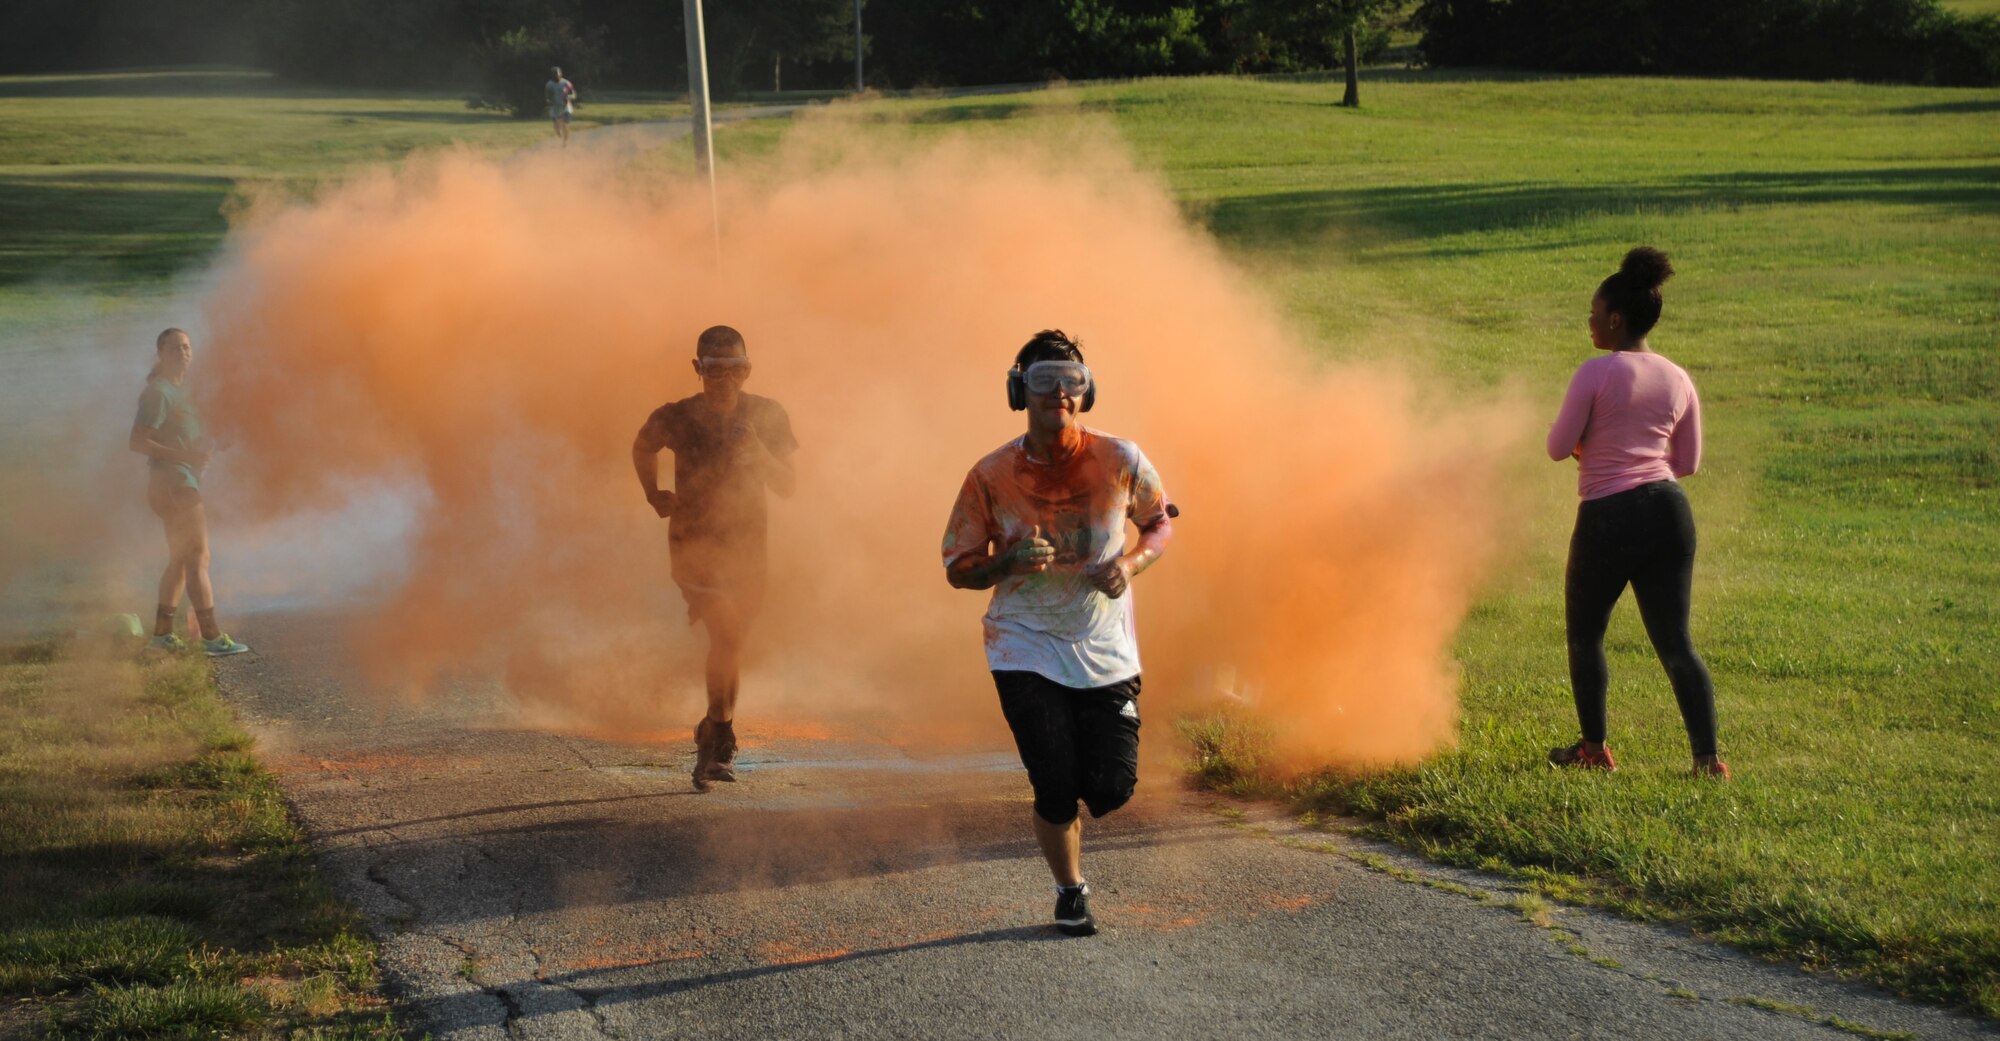 Participants run through a cloud of colored powder during the Lesbian, Gay, Bisexual and Transgender Pride Month Rainbow Run 5K at Whiteman Air Force Base, Mo., June 24, 2016. After the run, the 509th Civil Engineer Squadron fire department washed the powder from the streets. (U.S. Air Force photo by Senior Airman Danielle Quilla)